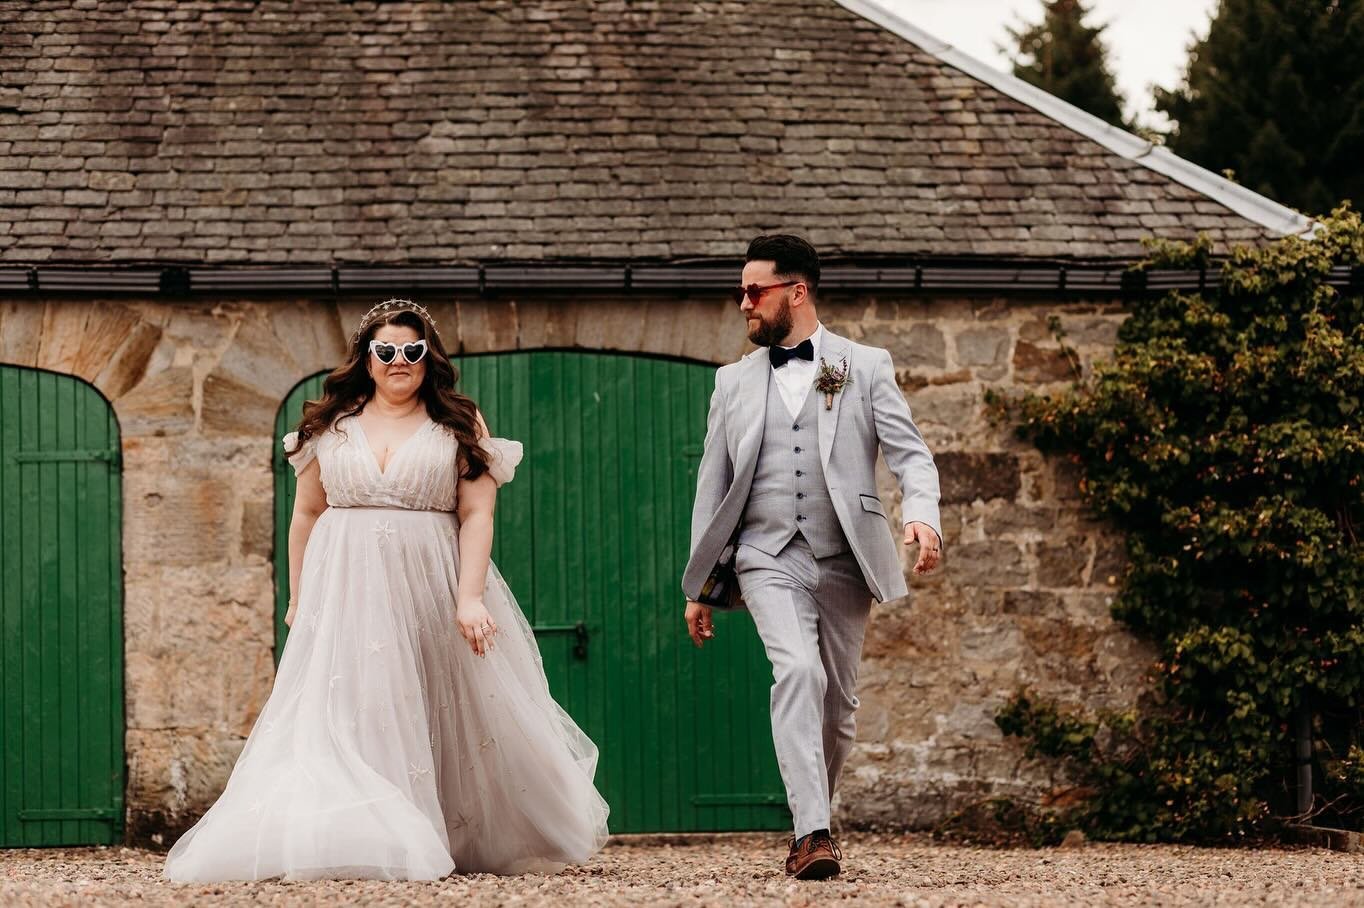 I am beyond excited to have finally received these images from @rachelspencephotography of Lisa &amp; Drew&rsquo;s wedding at the end of August last year&hellip;just how cool are these pair?!
.
We had a gloriously sunny day with margaritas, tarot rea